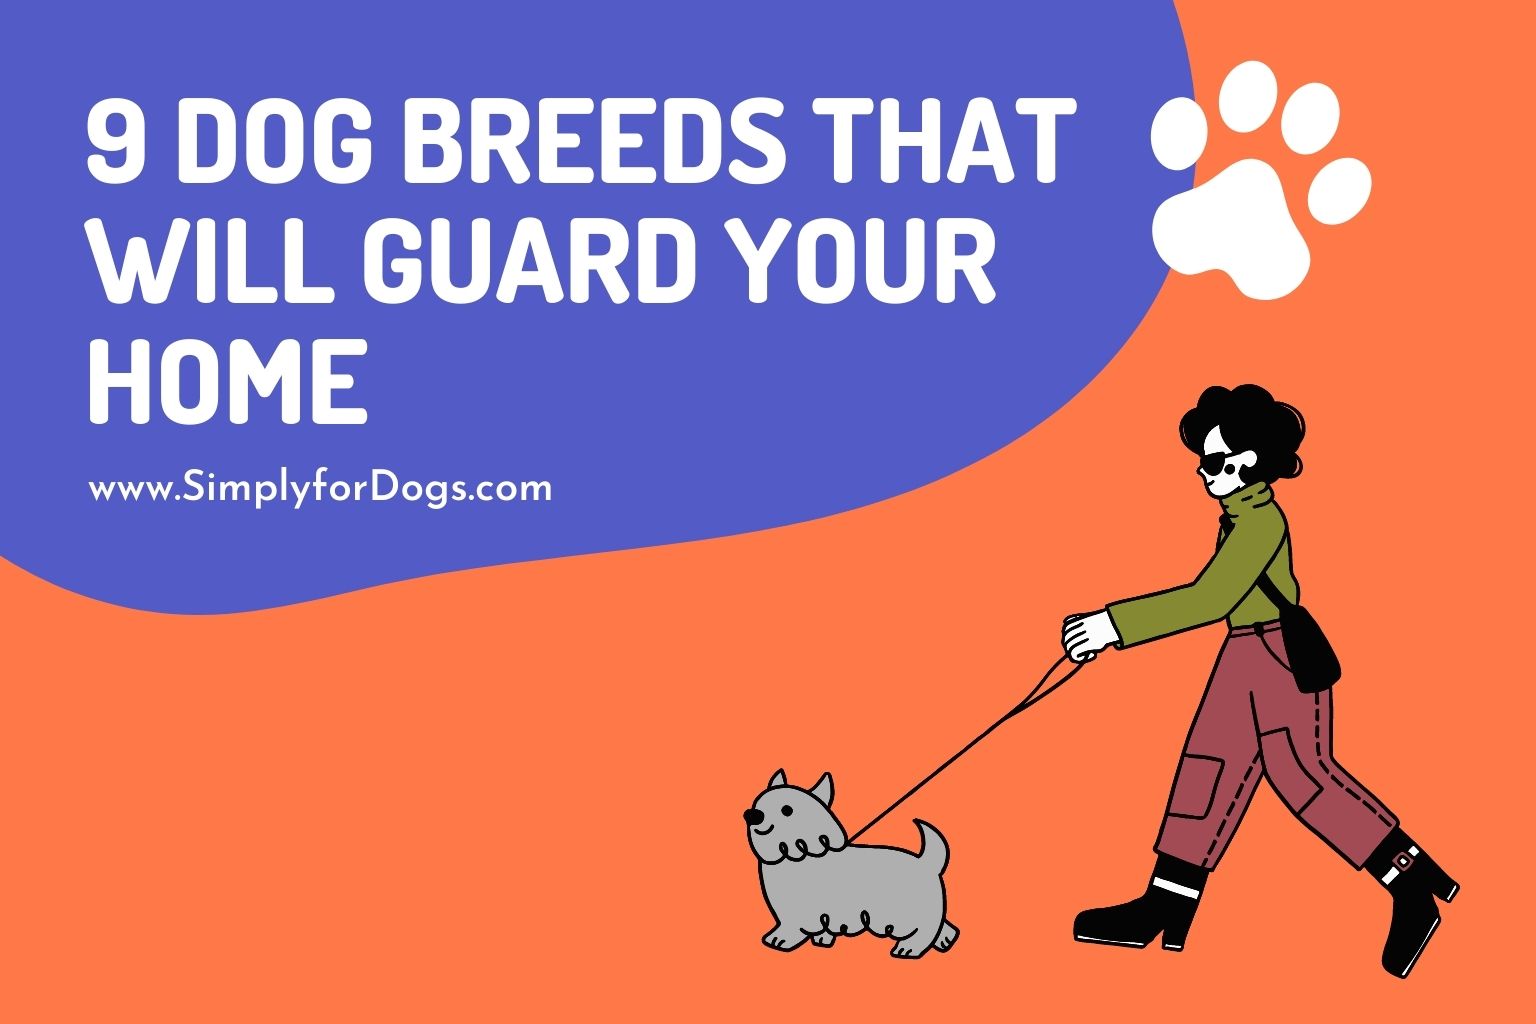 9 Dog Breeds That Will Guard Your Home